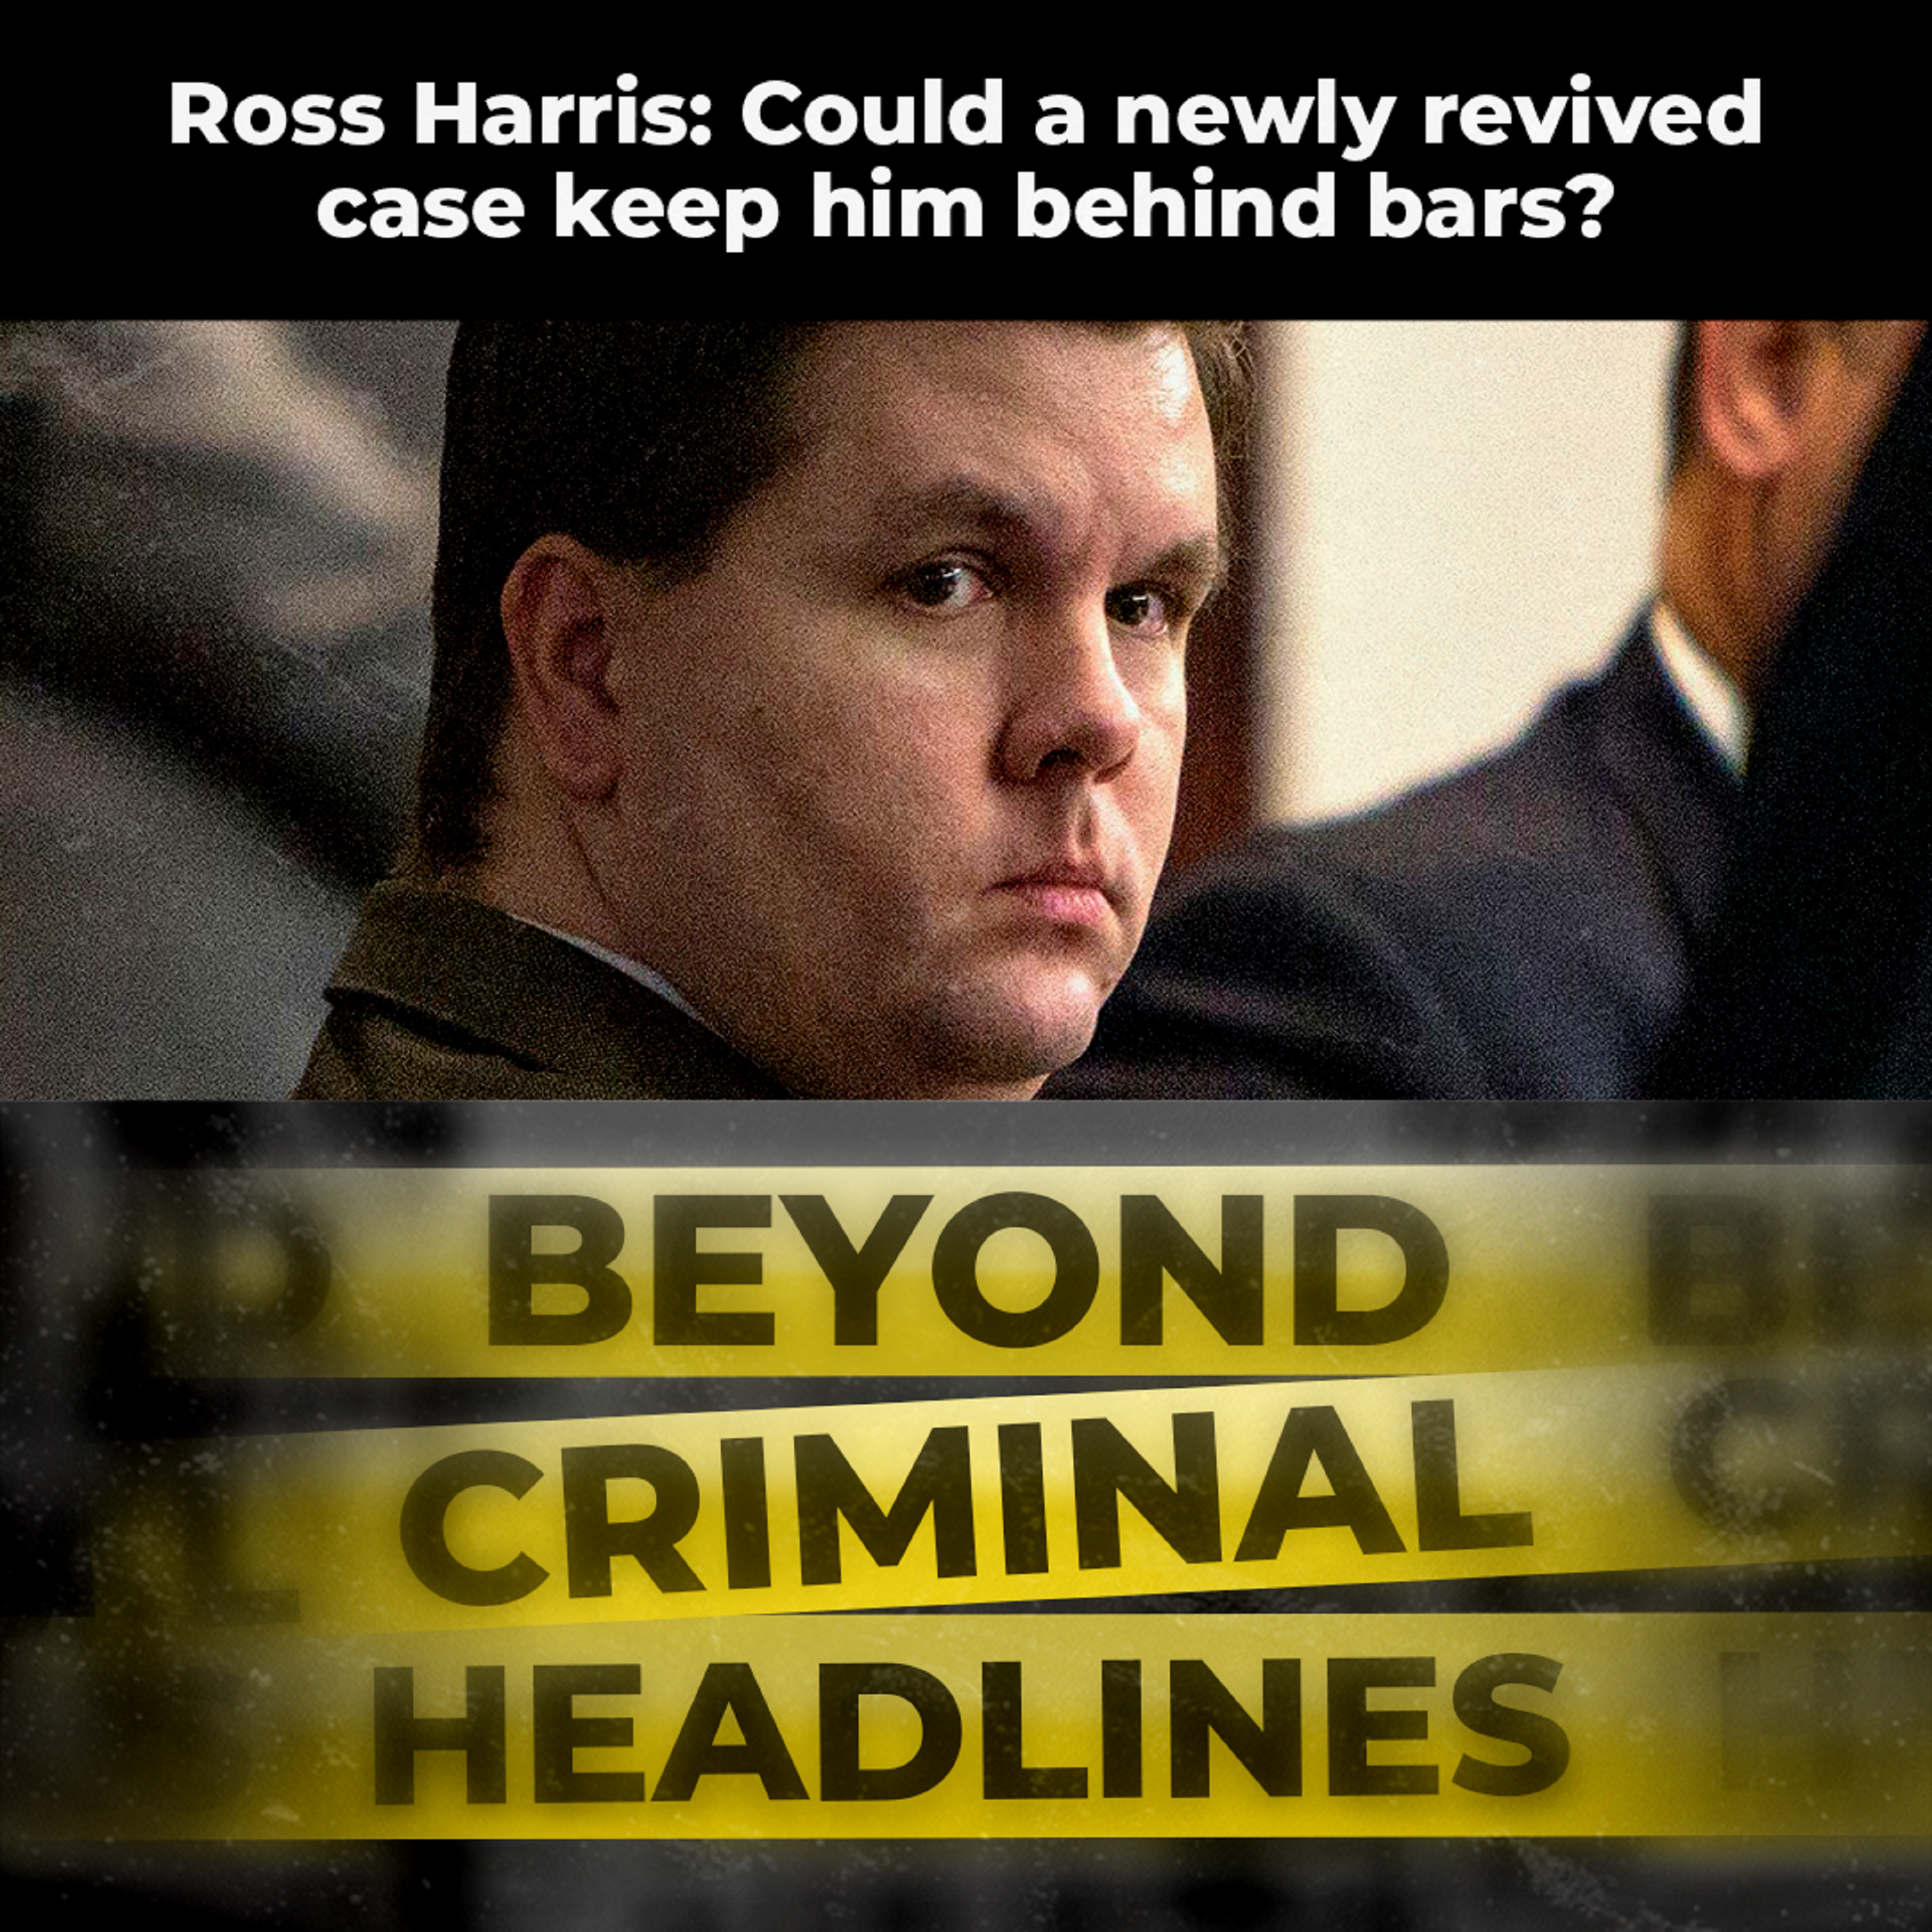 Ross Harris: Could a newly revived case keep him behind bars?